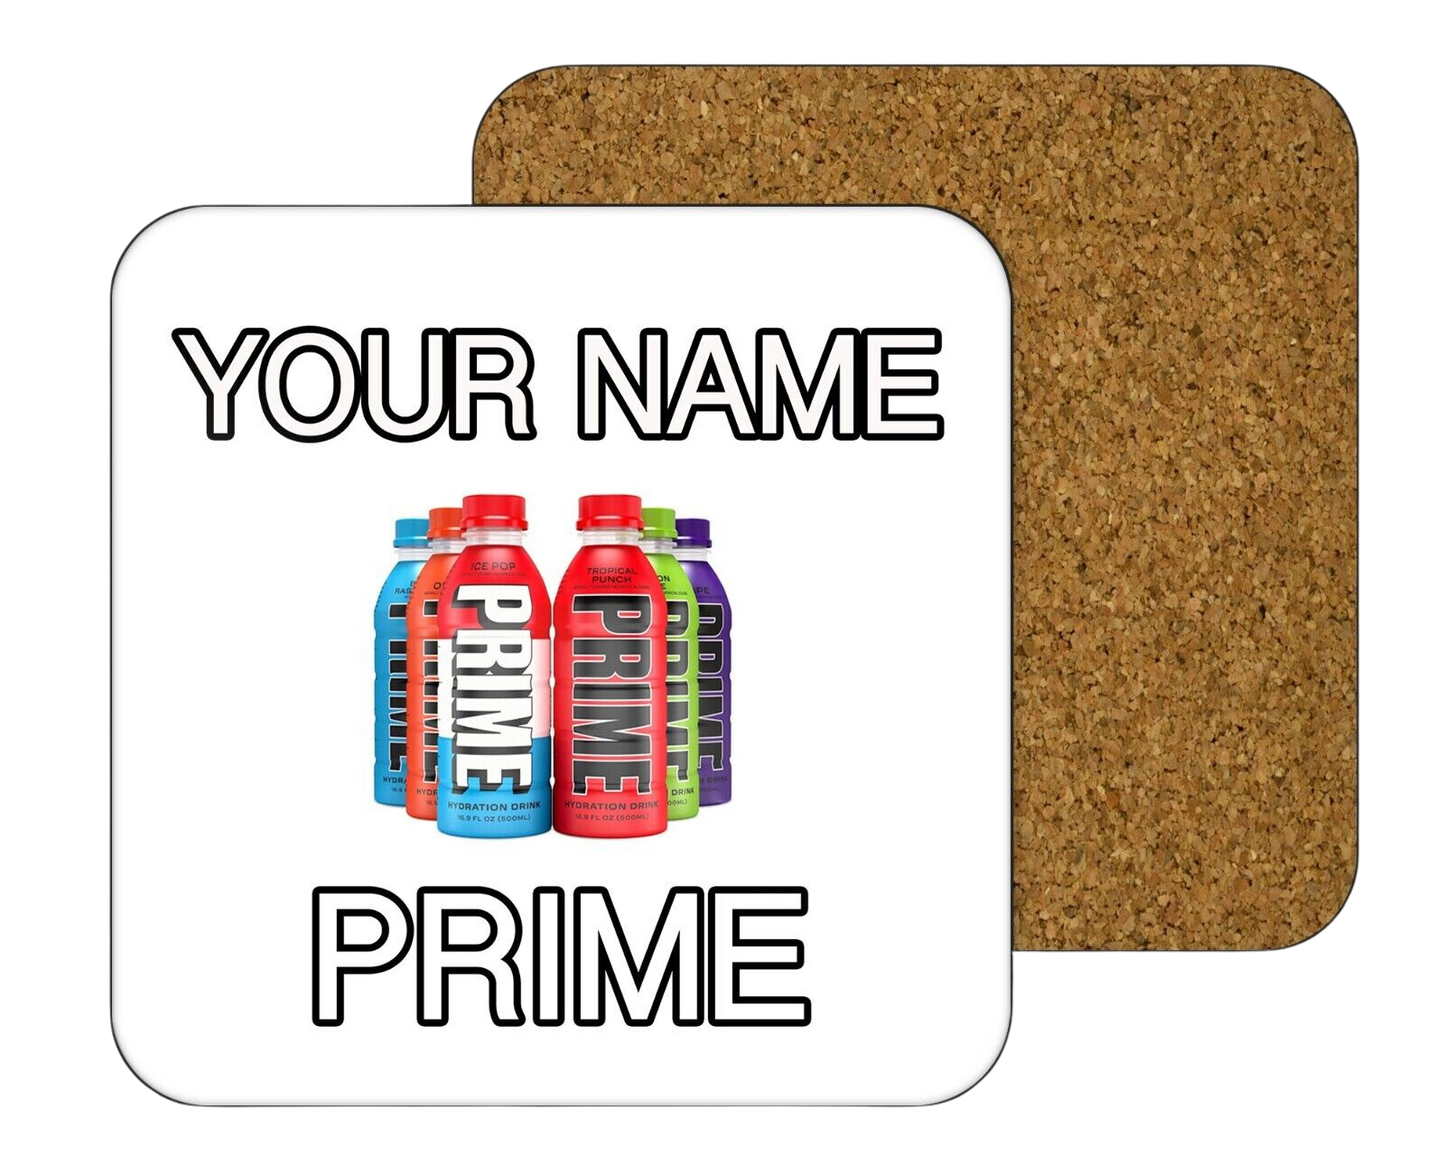 The Personalised PRIME Bottle Drinks Coaster